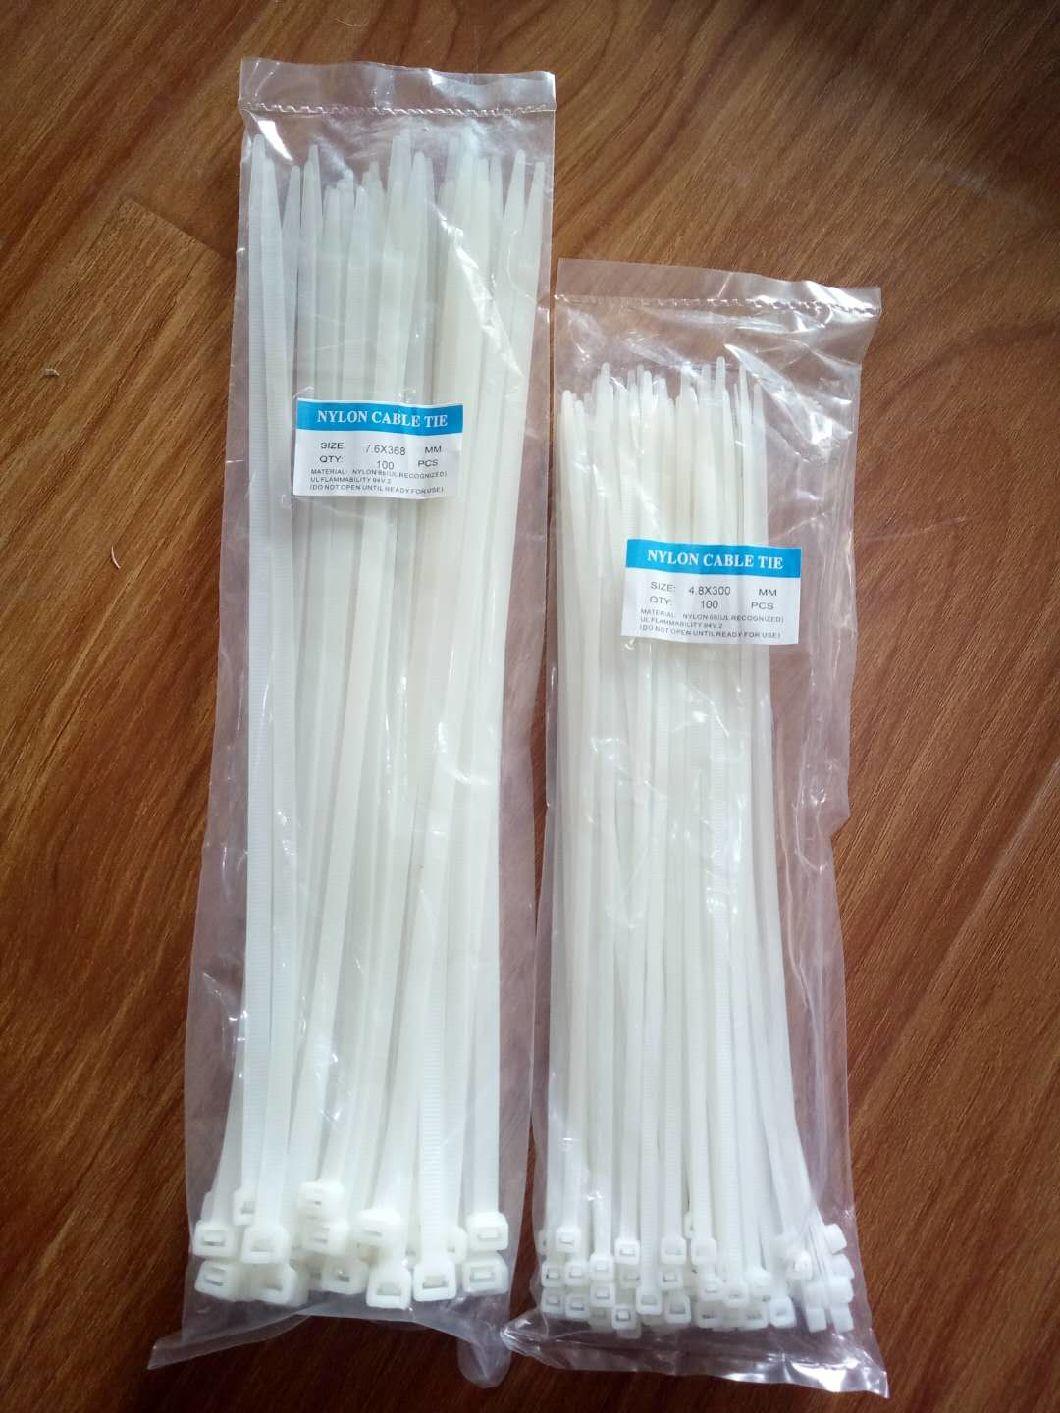 Black Nylon Cable Ties, 300mm X 4.8 mm Made in China